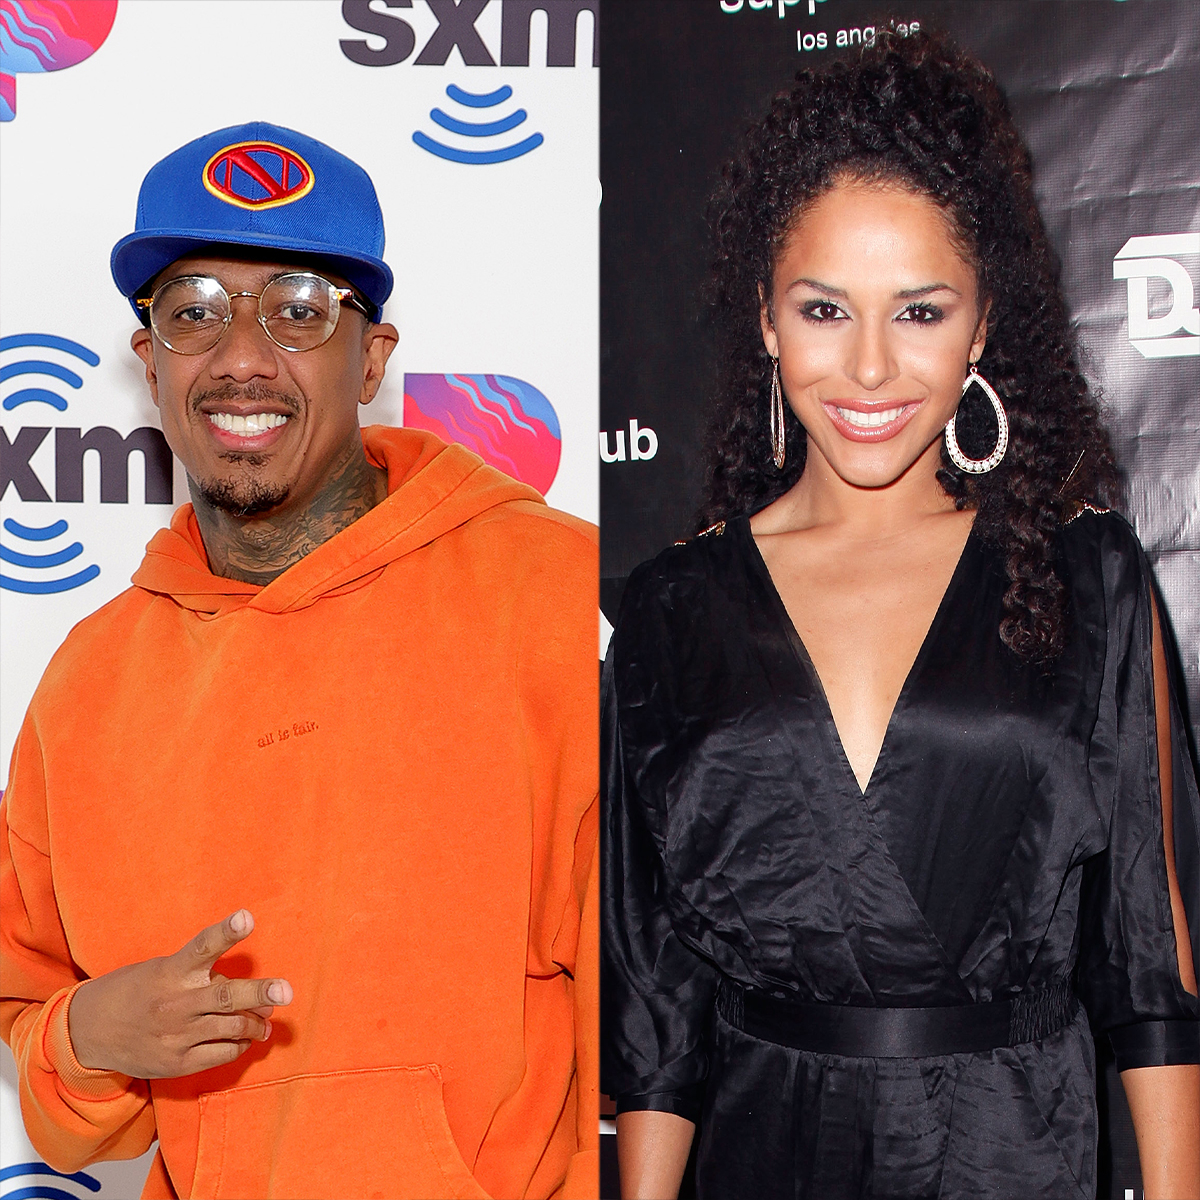 See Nick Cannon Step Out for Dinner Date With Ex Brittany Bell